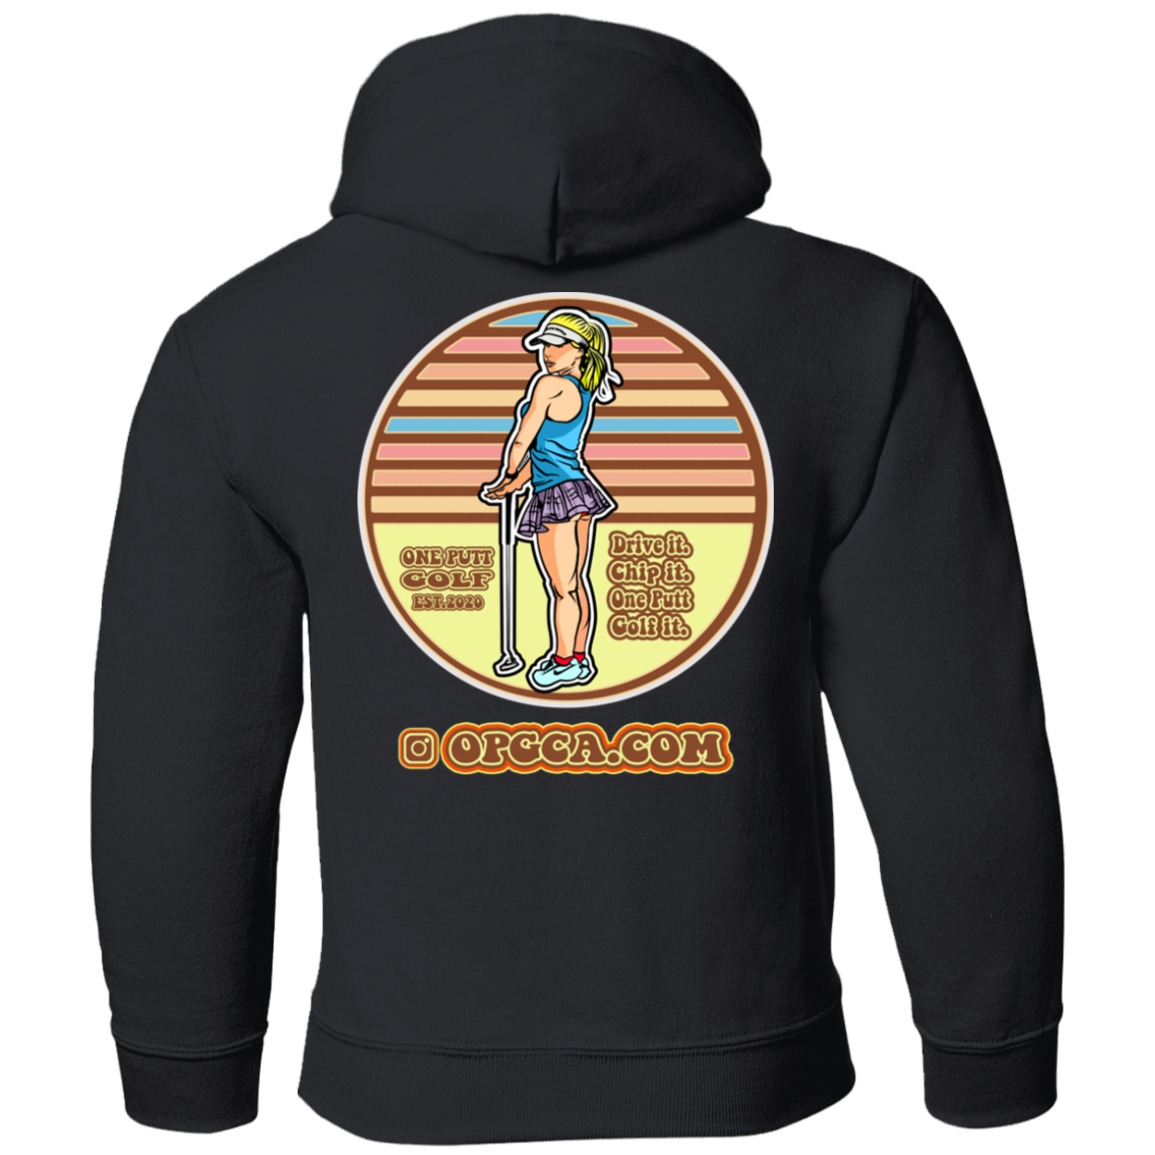 OPG Custom Design #28. Drive it. Chip it. One Putt golf it. Youth Pullover Hoodie